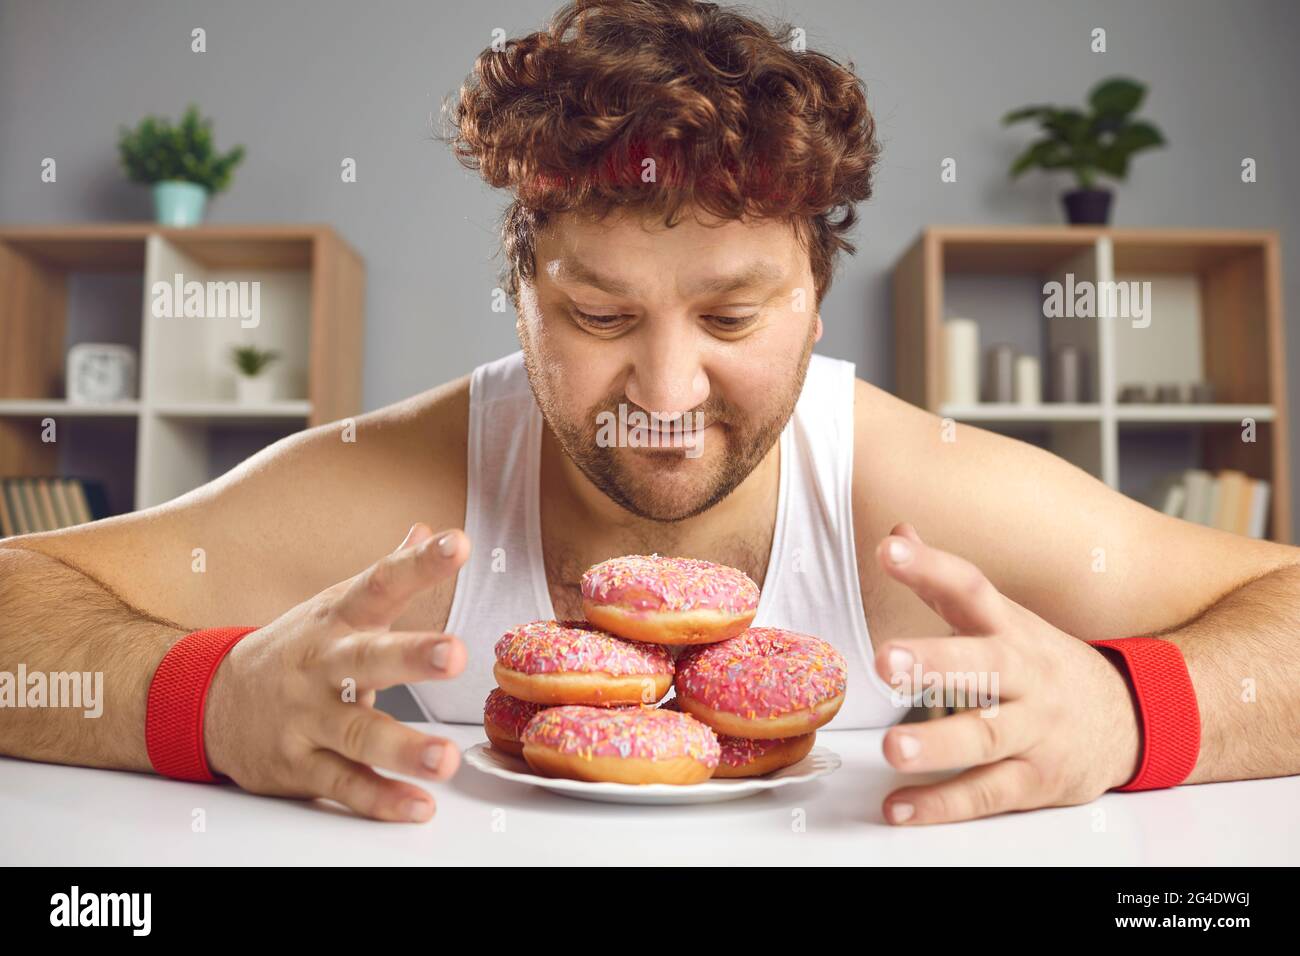 Funny chubby man looking at plate of sweet tempting donuts with love and adoration Stock Photo